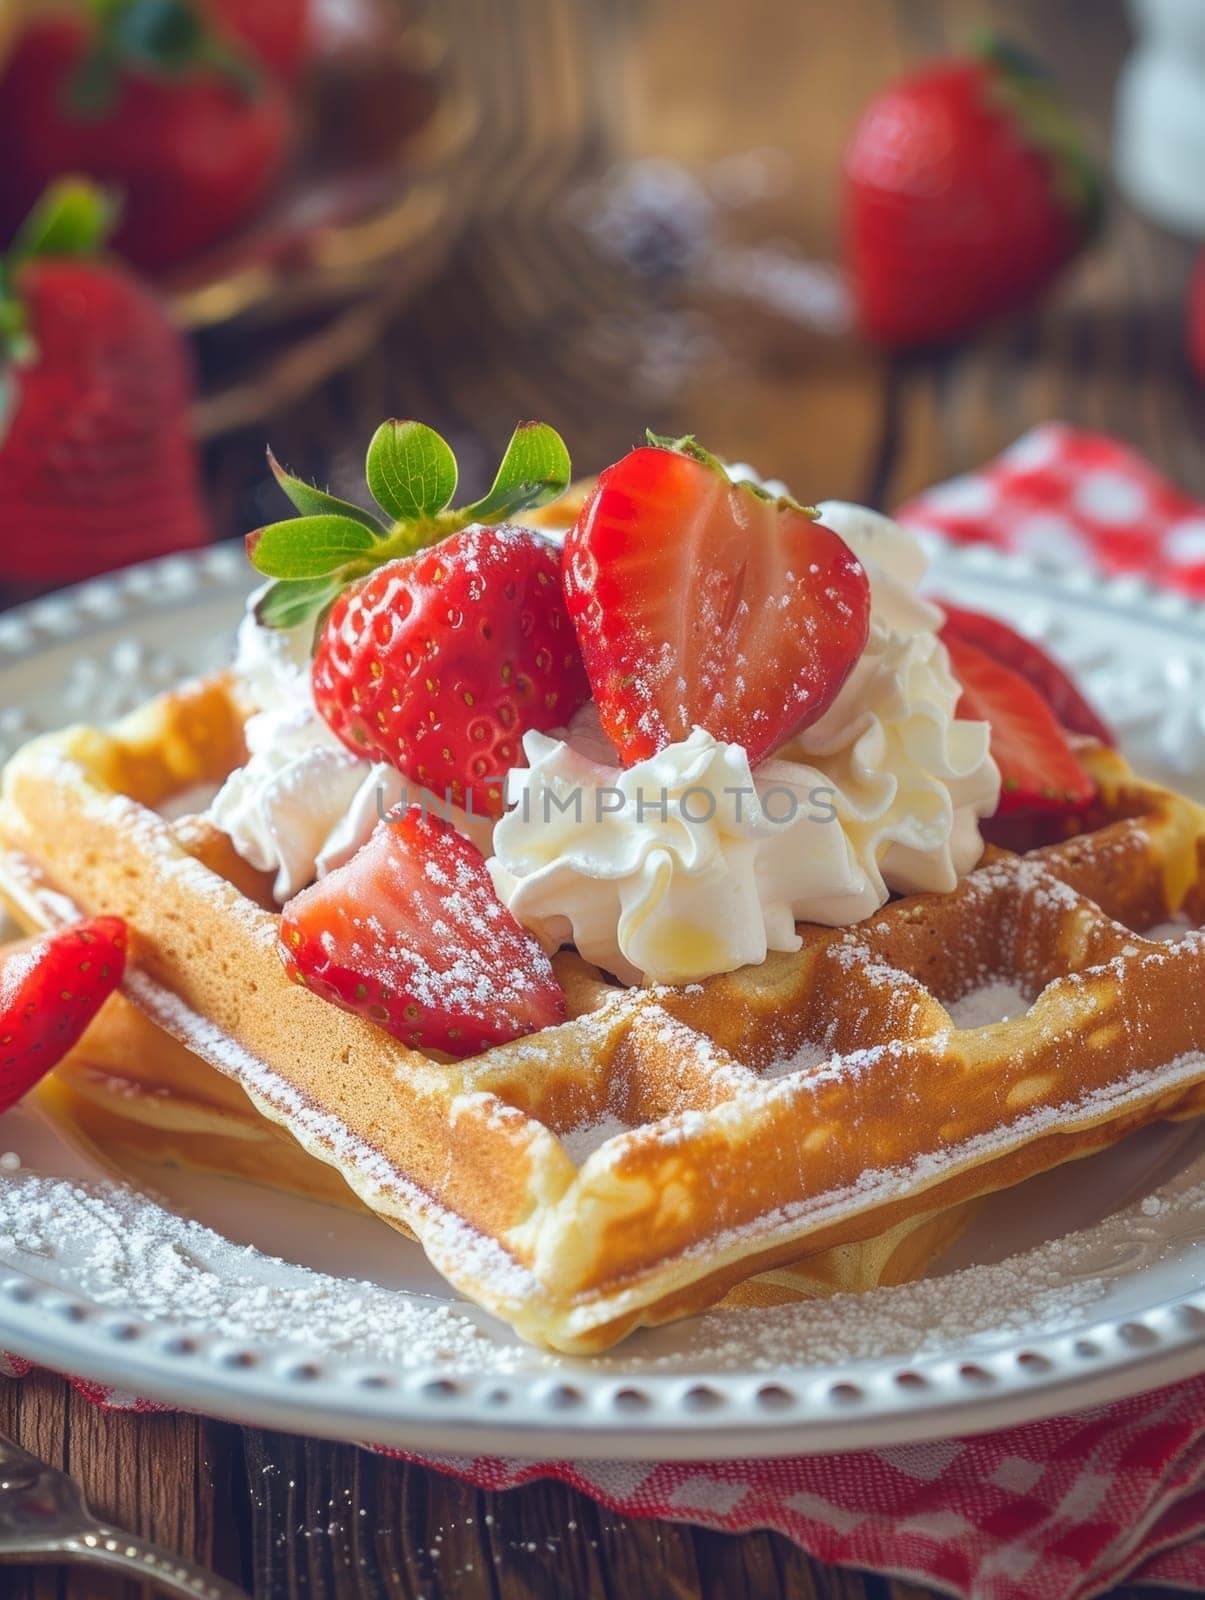 Belgian waffles on a fine china plate, topped with strawberries and whipped cream. A tempting and delightful Belgian dessert